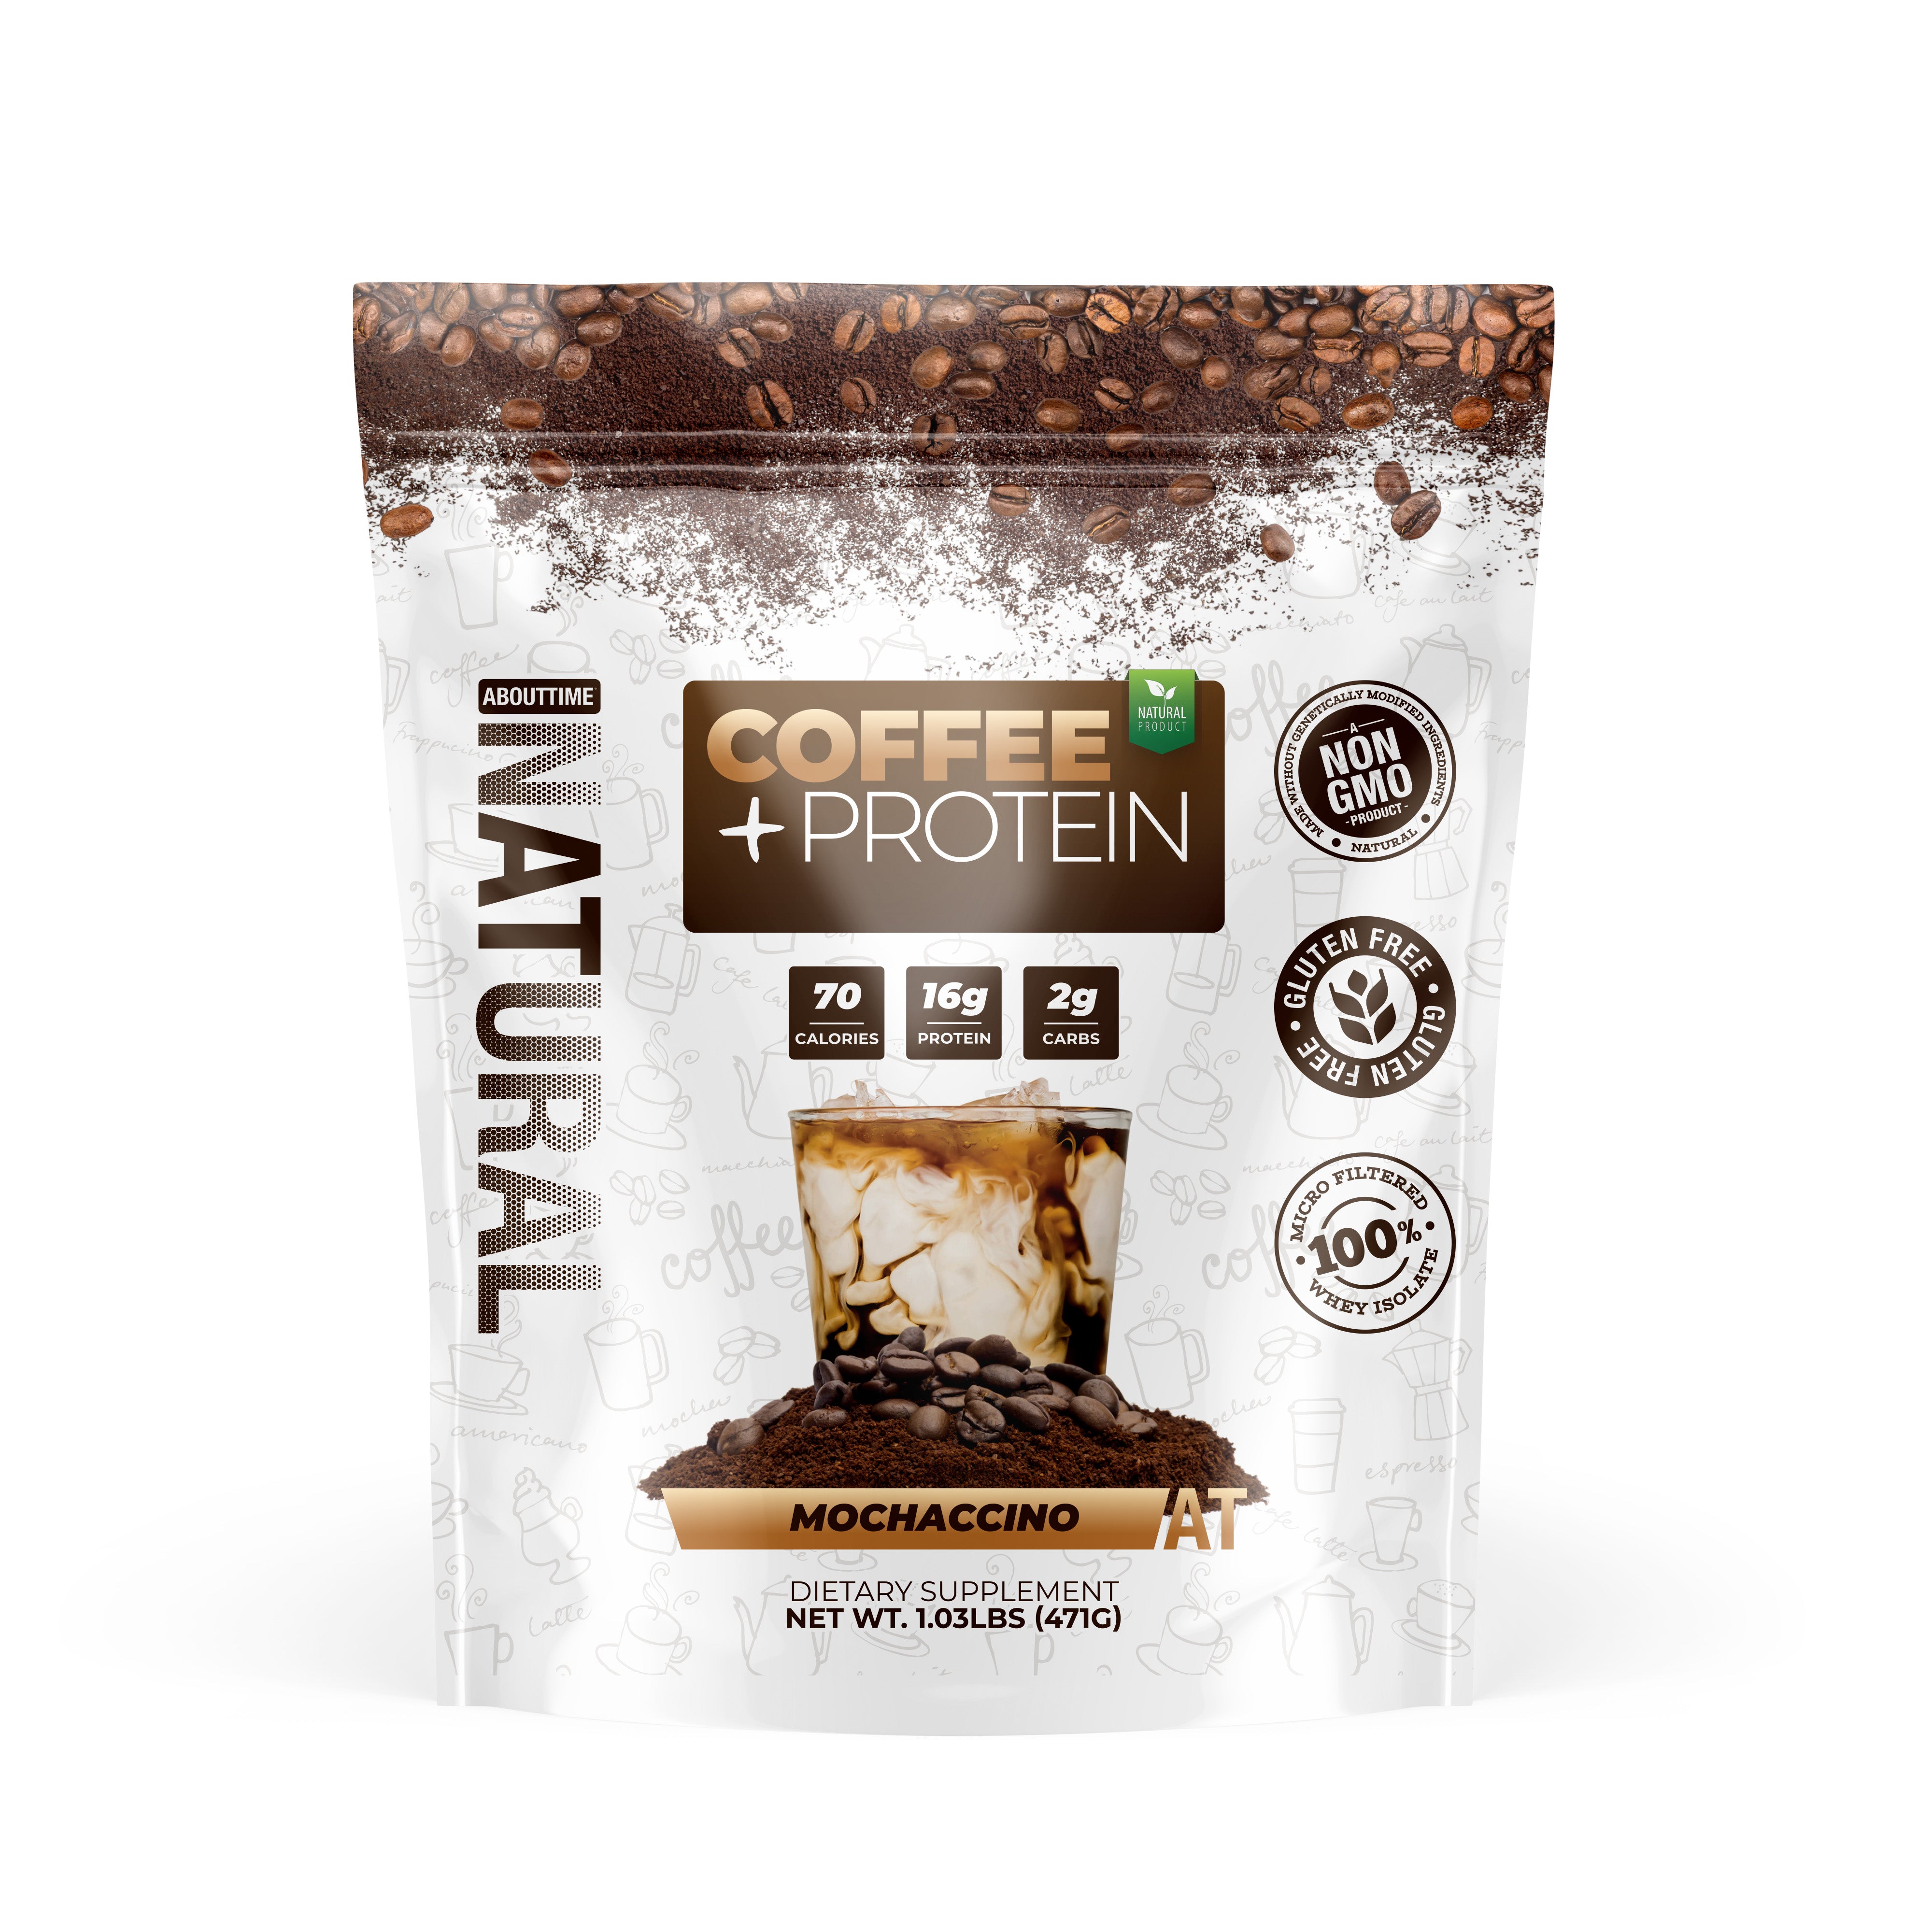 Herbalife Nutrition - Tri Blend Select provides naturally sourced